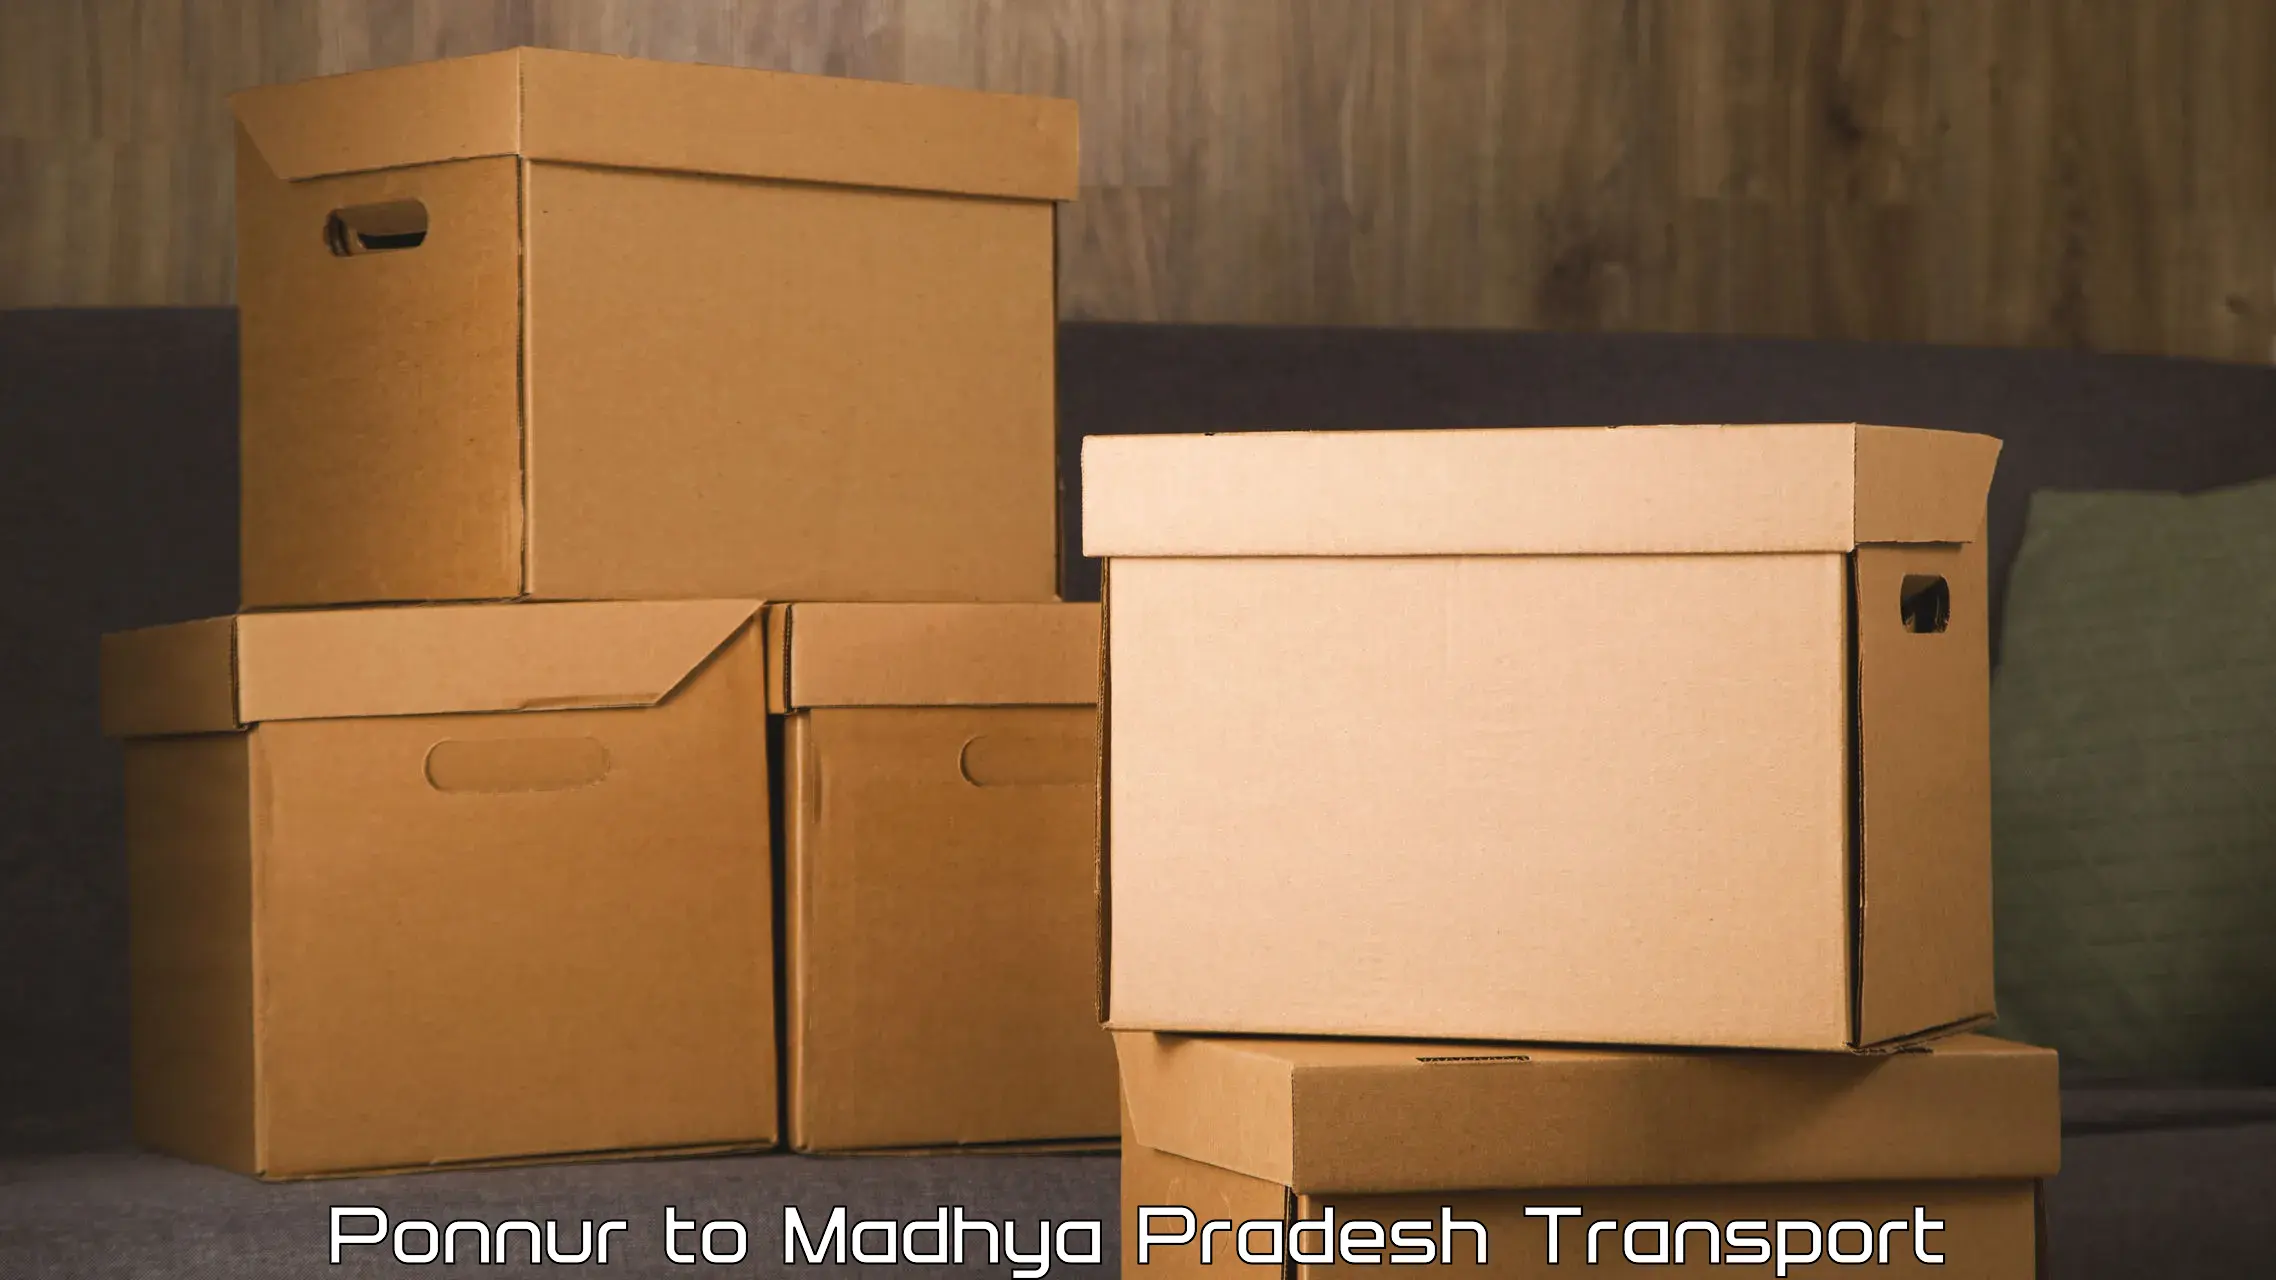 Express transport services Ponnur to Bhopal